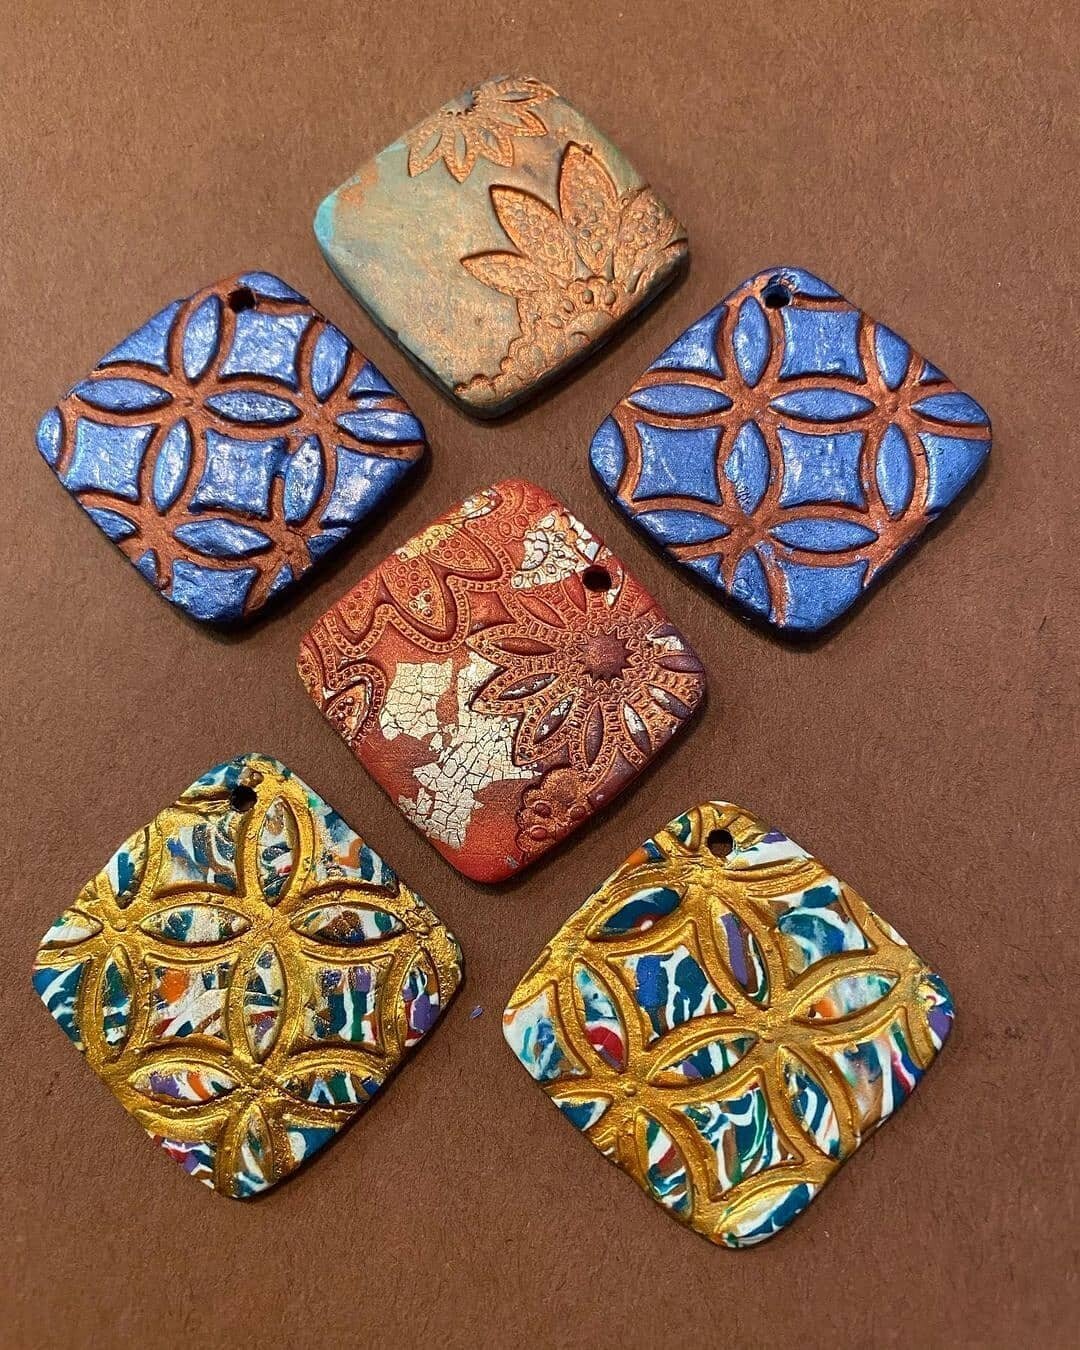 Sara Stover has been working on making polymer pendants and sculptures over the past year and a half. We can't wait to reopen our gallery to share some of her beautiful art with the world. 💥
.
.
.
.
.
.
.
.
.
.
 #polymer #clay #pendants #jewlerymaki